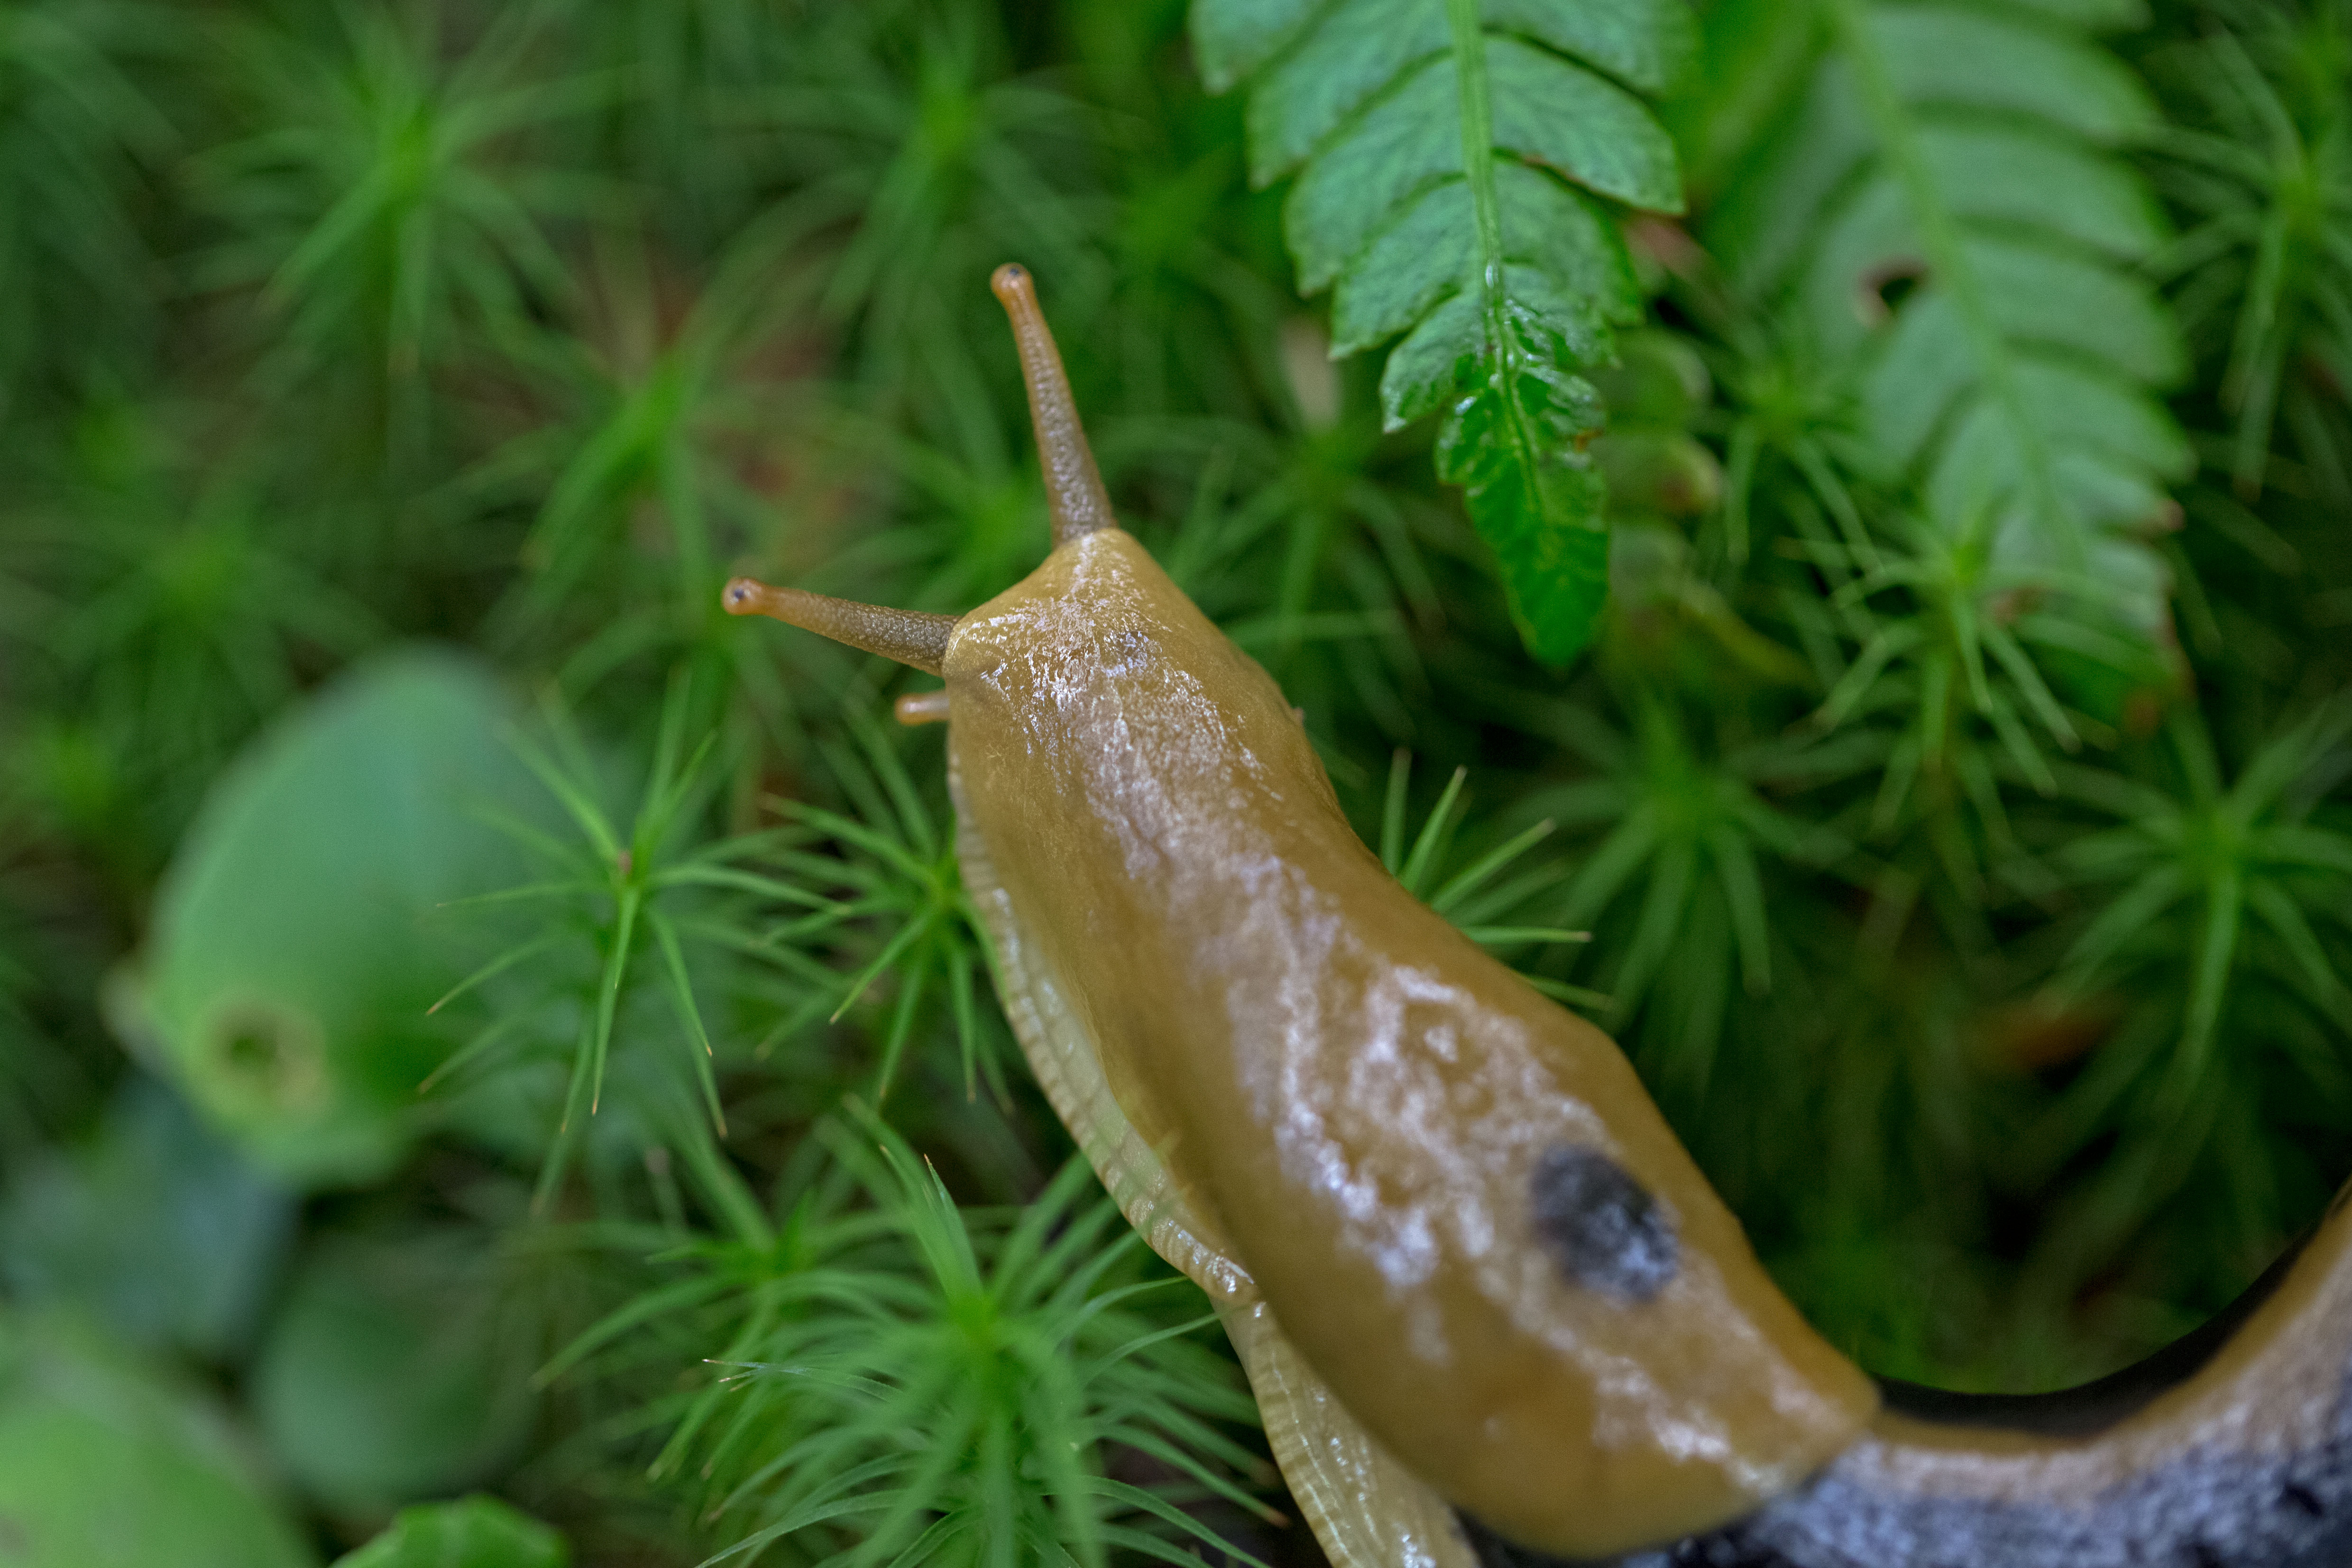 A yellow-green slug with dark splotches maneuvers over moss and ferns